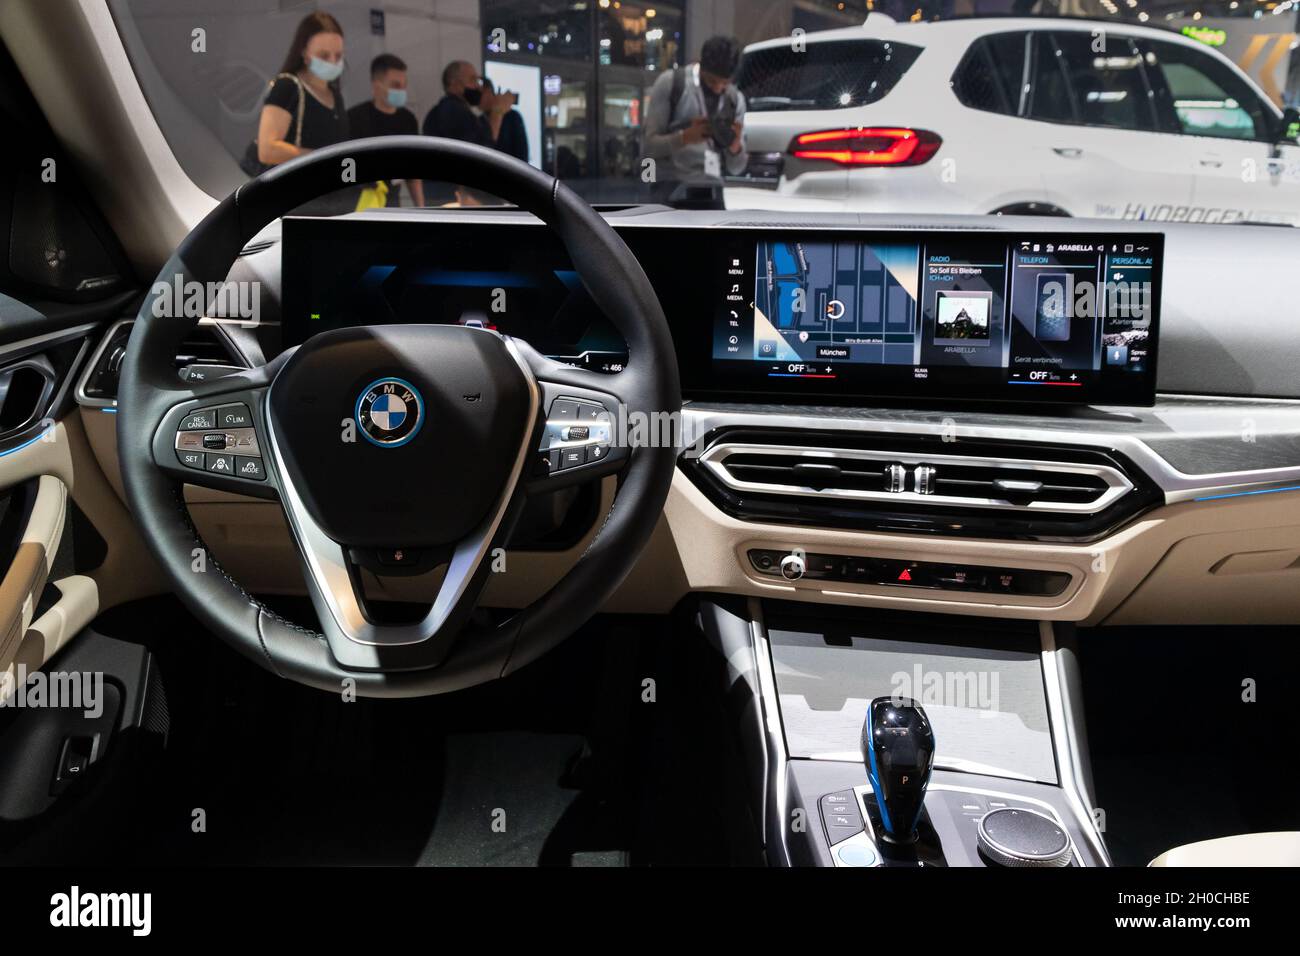 Interior view of the BMW i4 all-electric Gran Coupe car showcased at the IAA Mobility 2021 motor show in Munich, Germany - September 6, 2021. Stock Photo